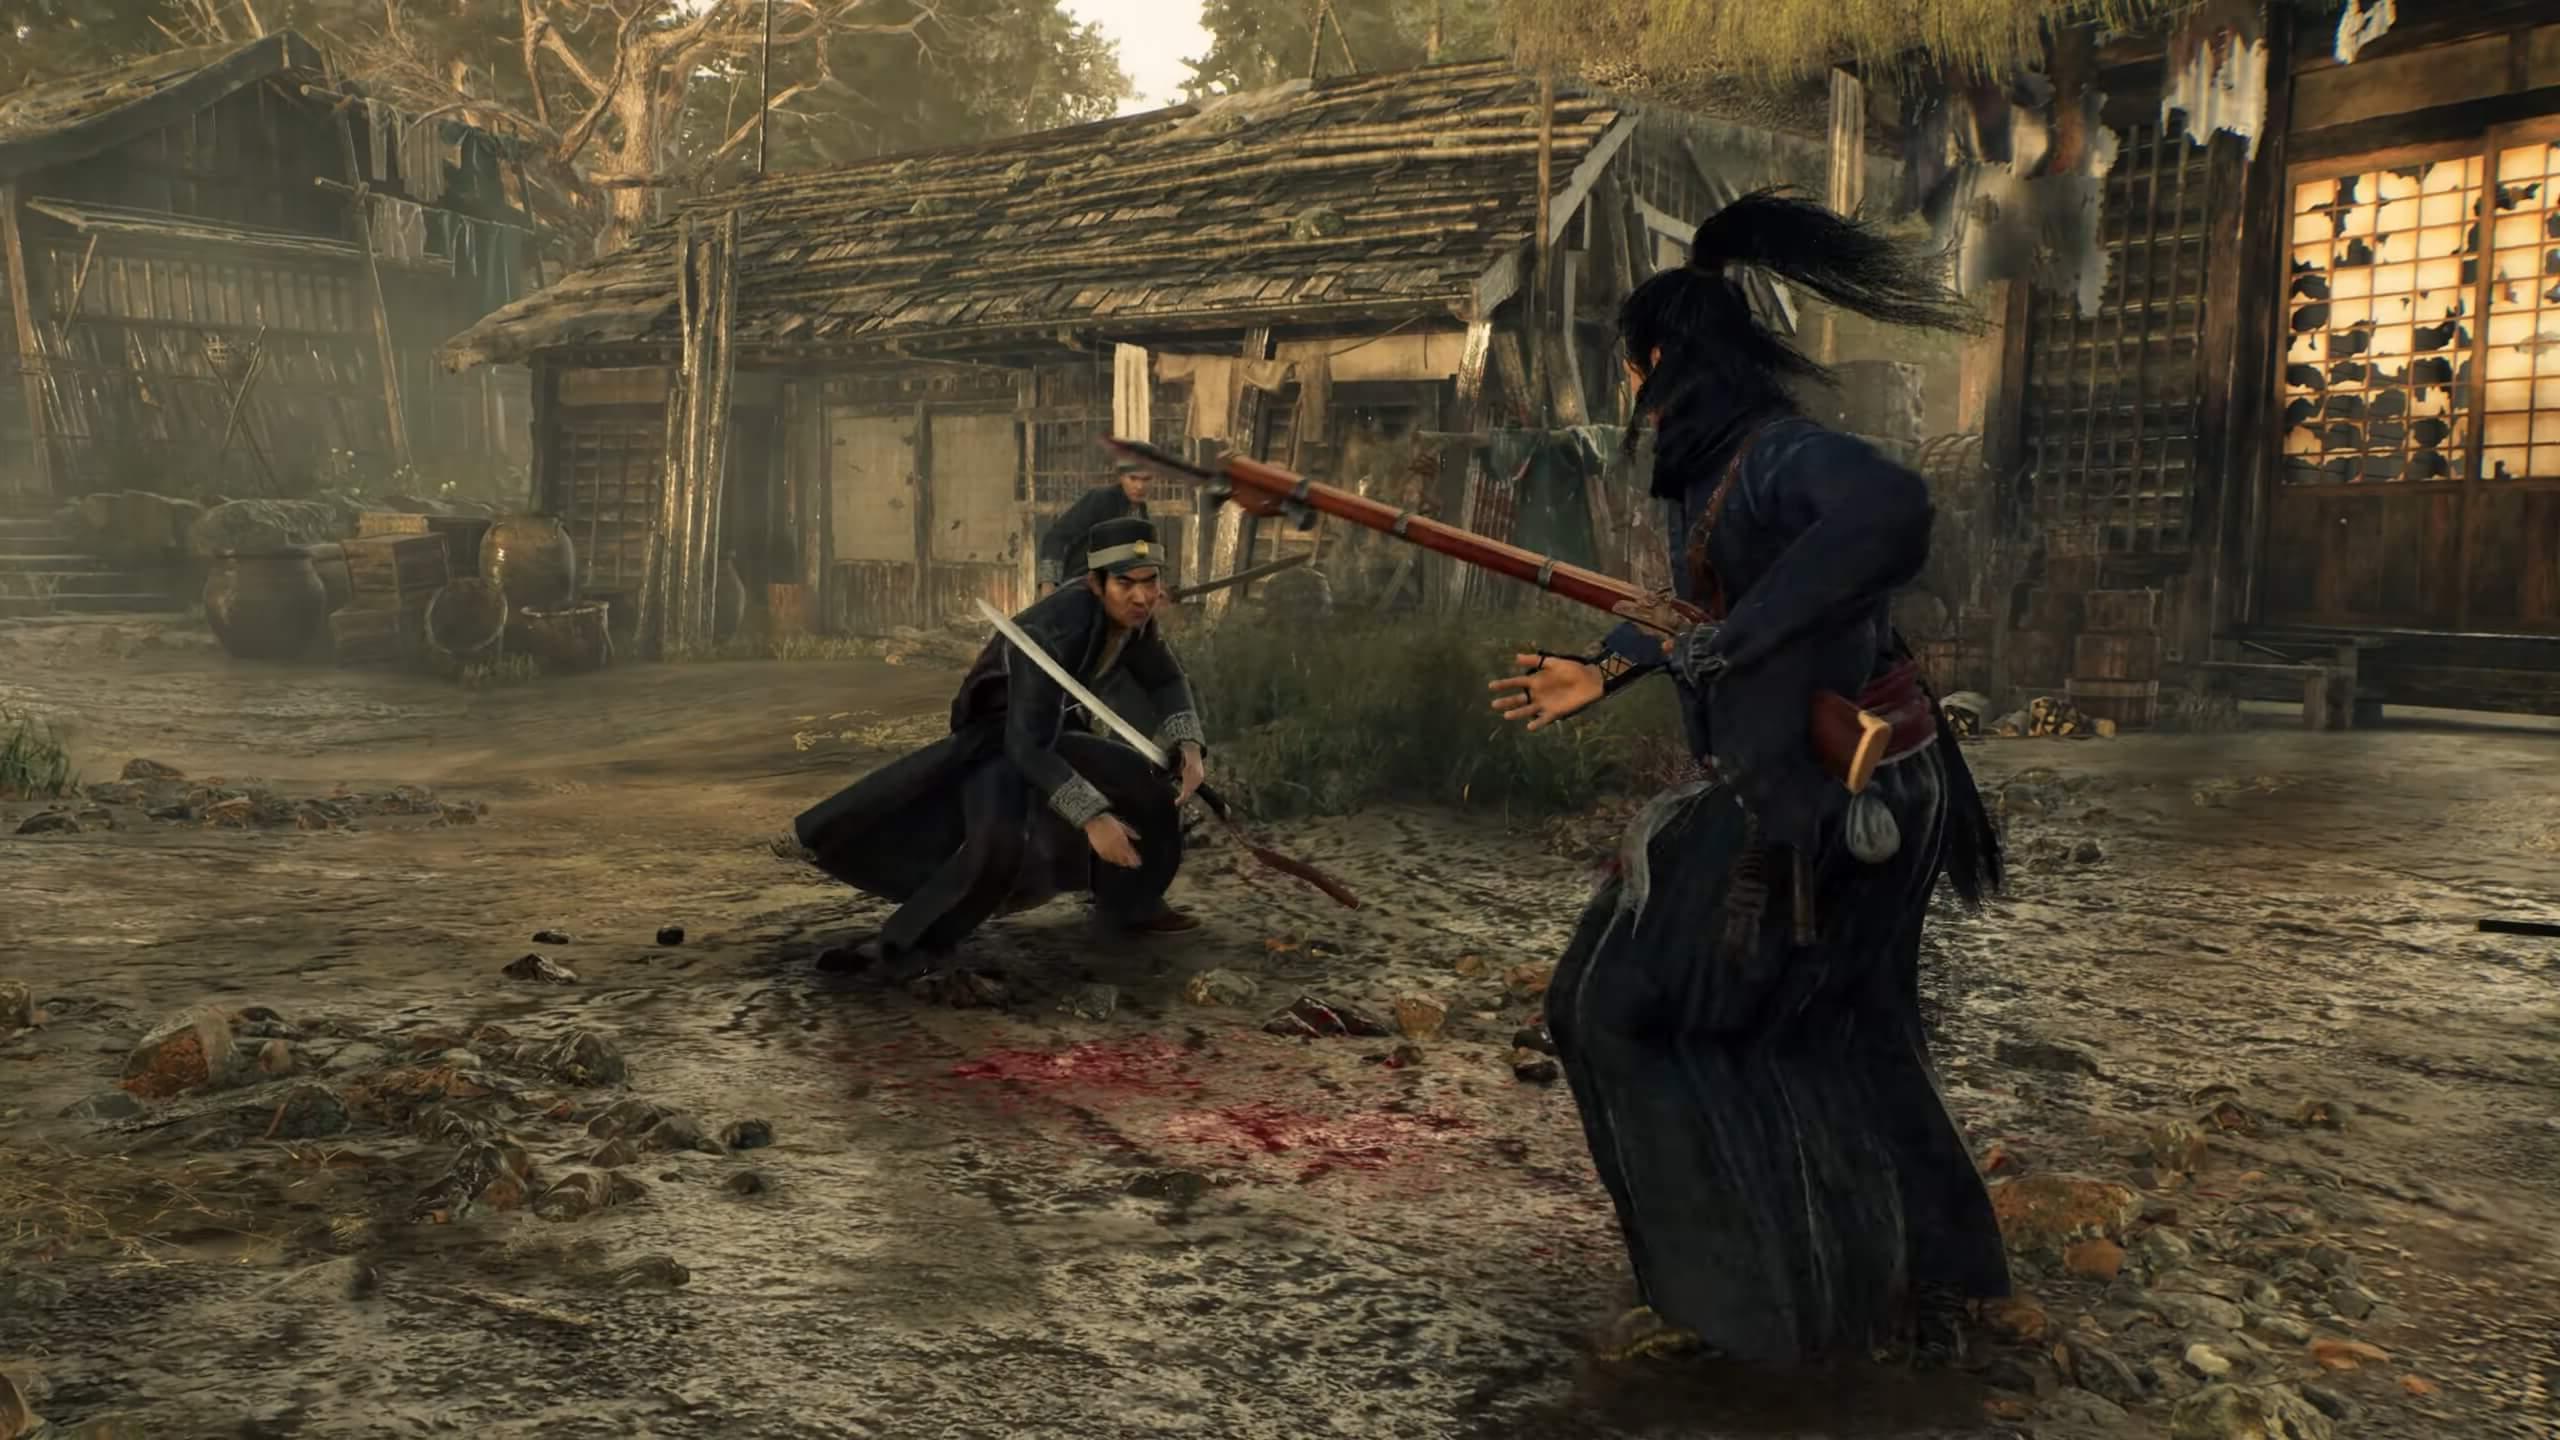 Rise of the Ronin is an action RPG from Ninja which is going to become PC in 2024 - بازی Rise of Ronin توسط سازندگان Nioh برای پلی استیشن 5 معرفی شد